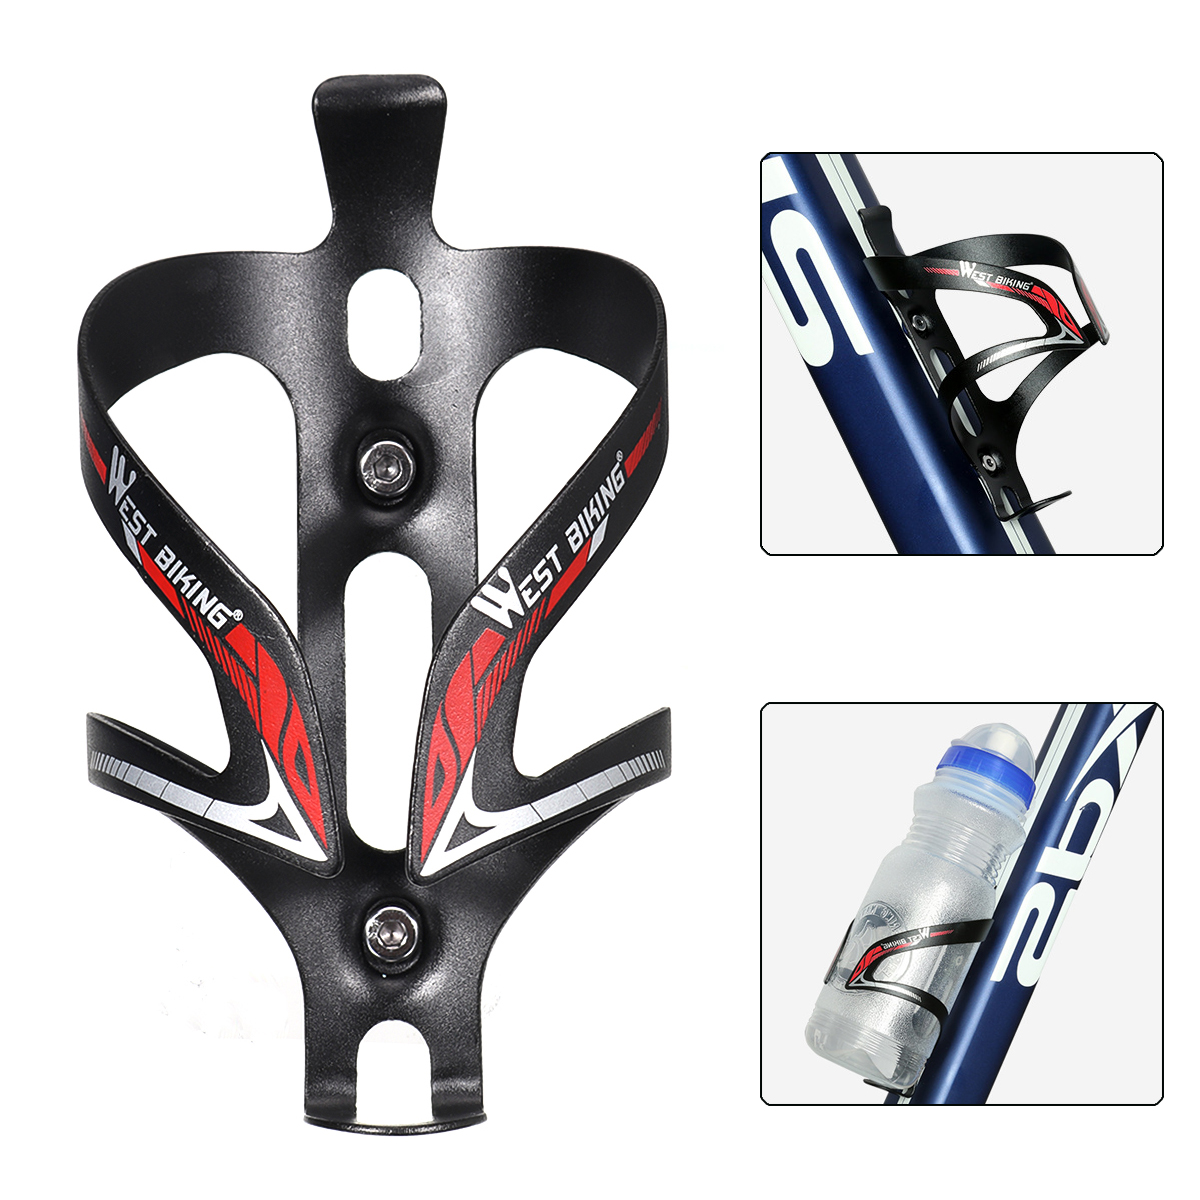 Aluminum Alloy Bike Bicycle Cycling Riding Drink Water Bottle Holder Rack Cage X 